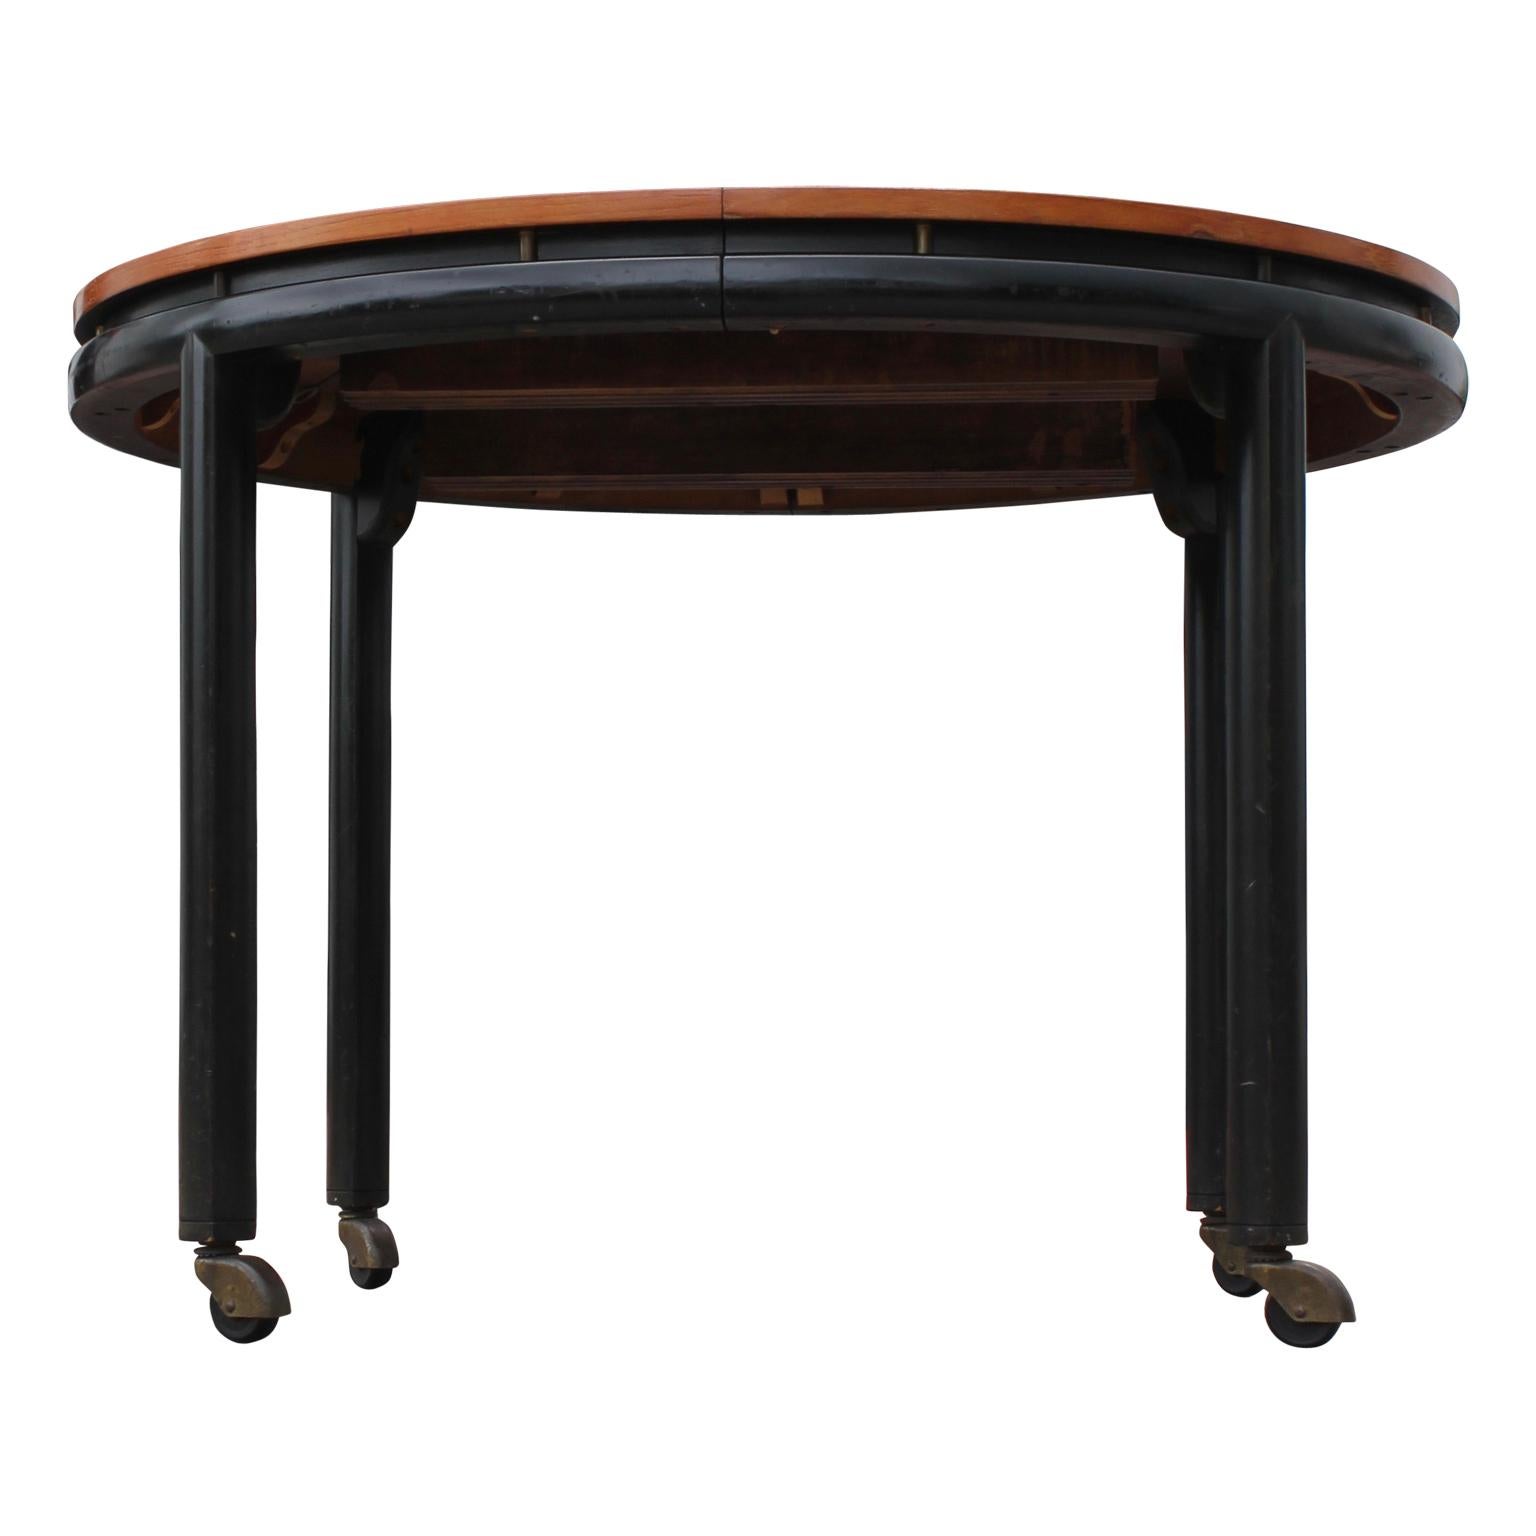 Mid-Century Modern Expandable Oval Table by Michael Taylor for Baker New World Collection